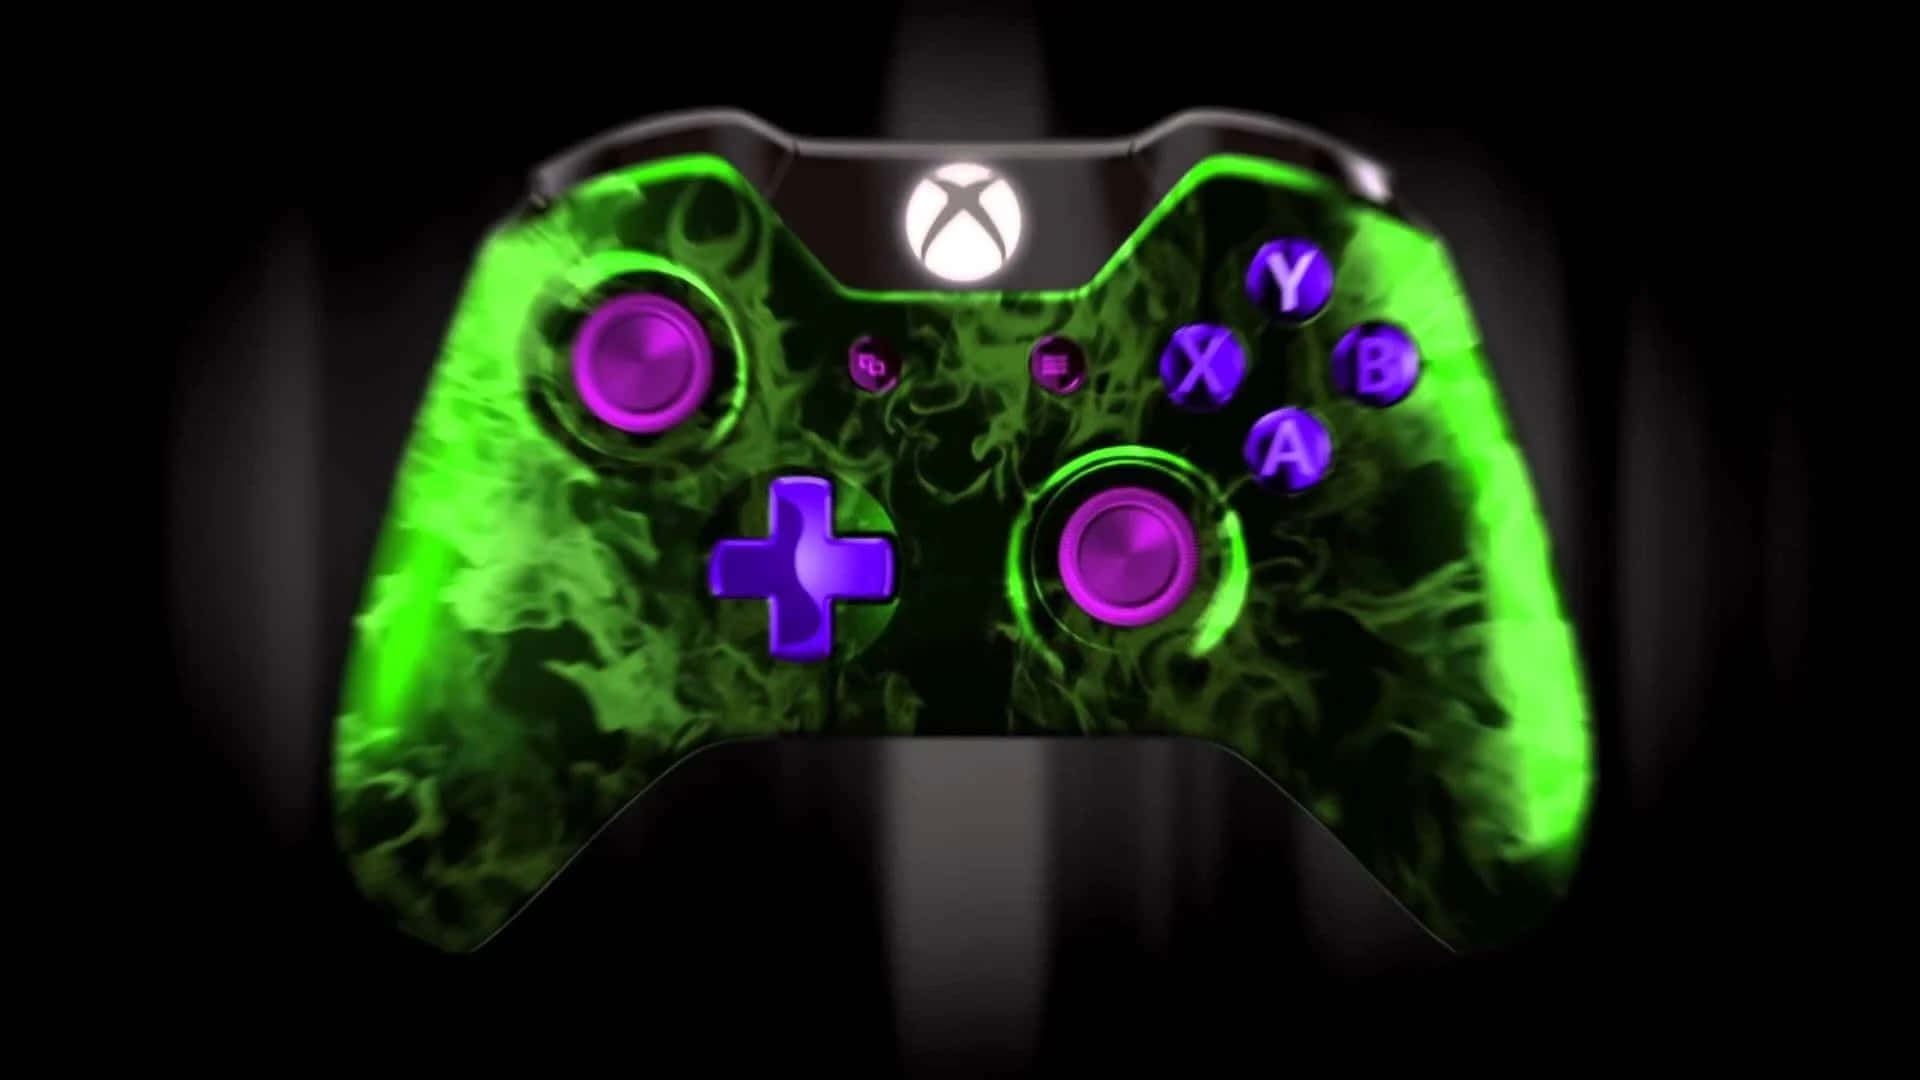 "Experience the next level of gaming with Cool Xbox!" Wallpaper